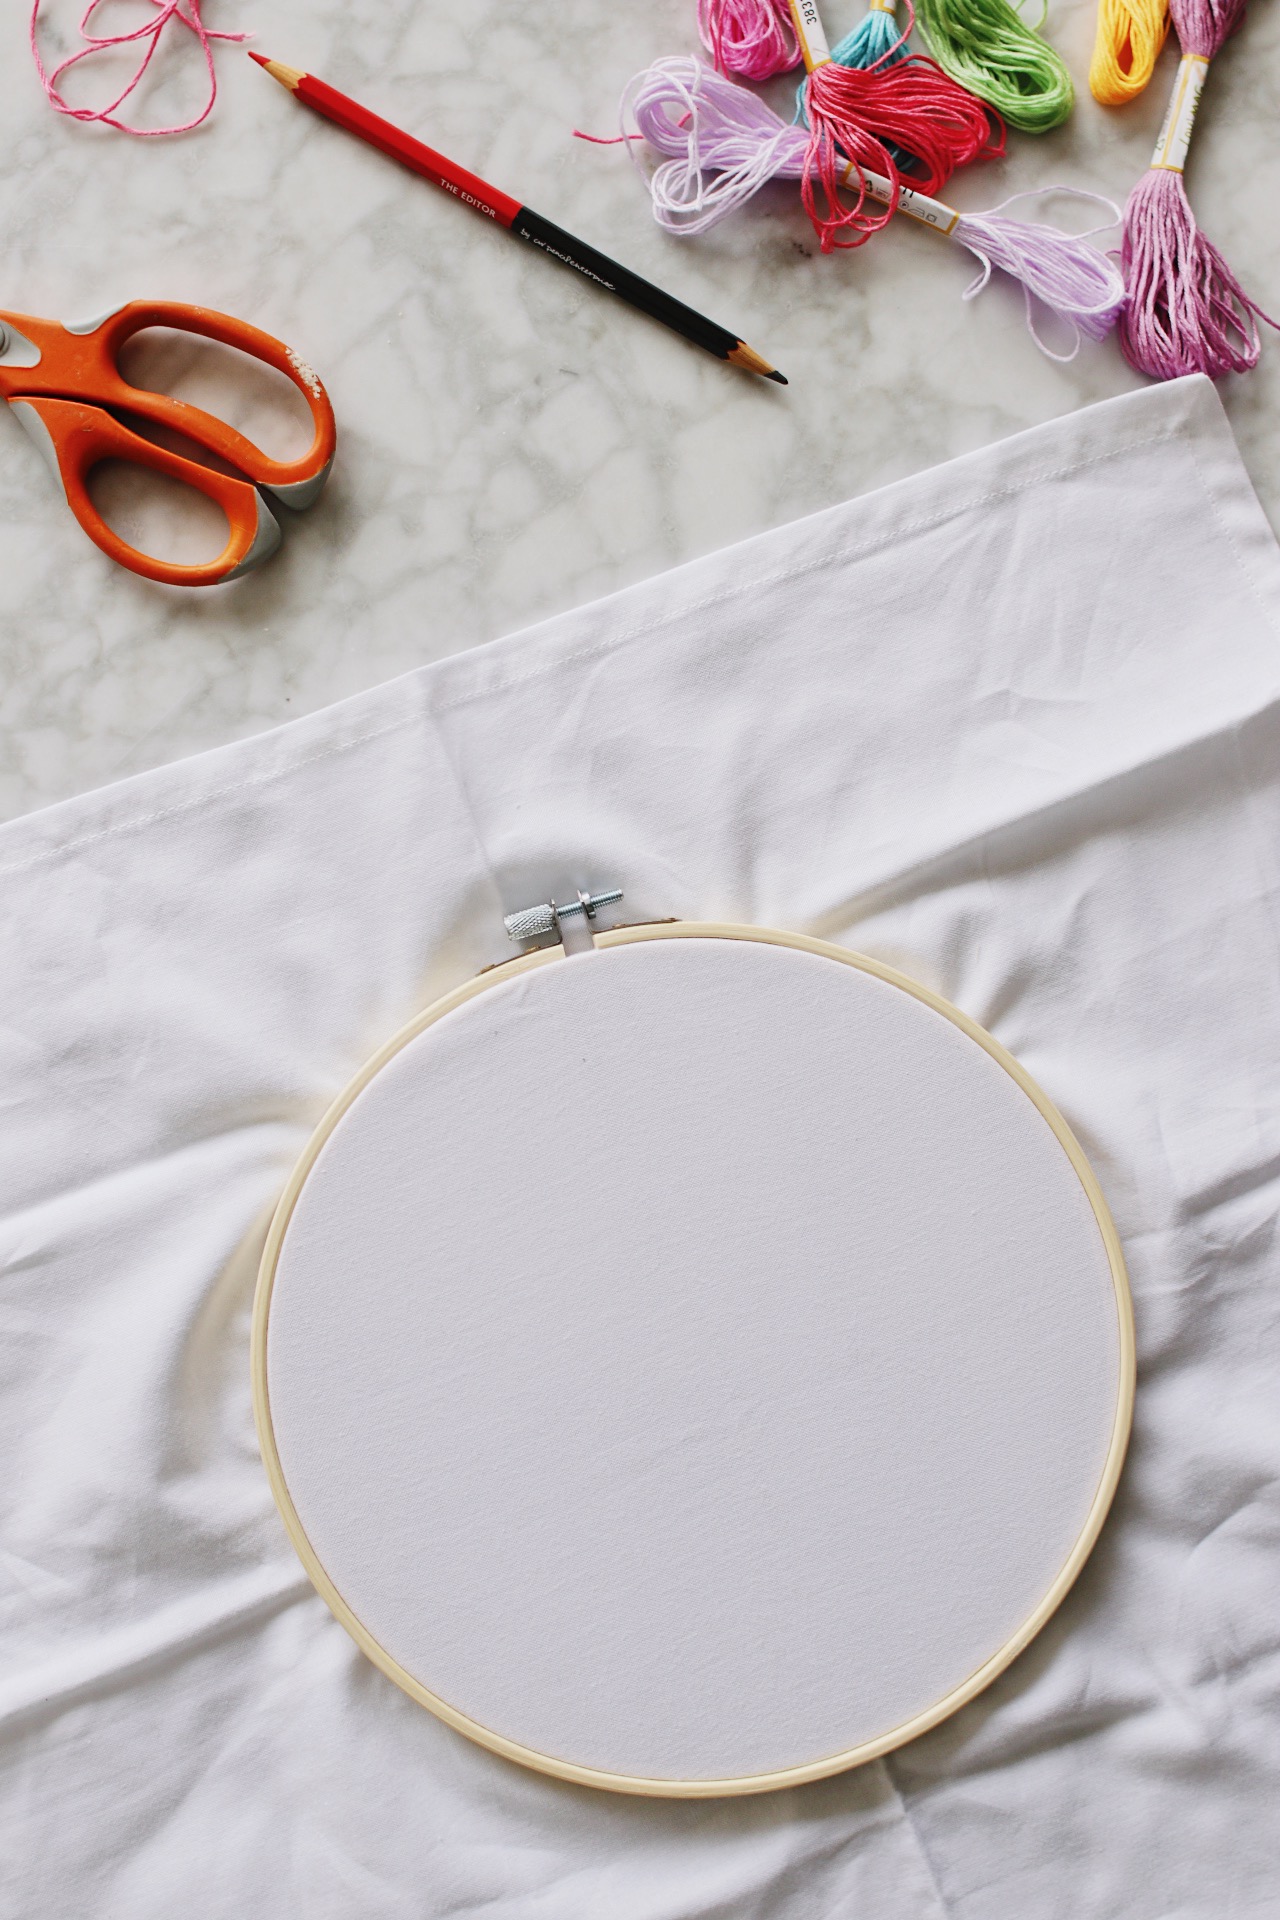 DIY Embroidered Matzah Cover